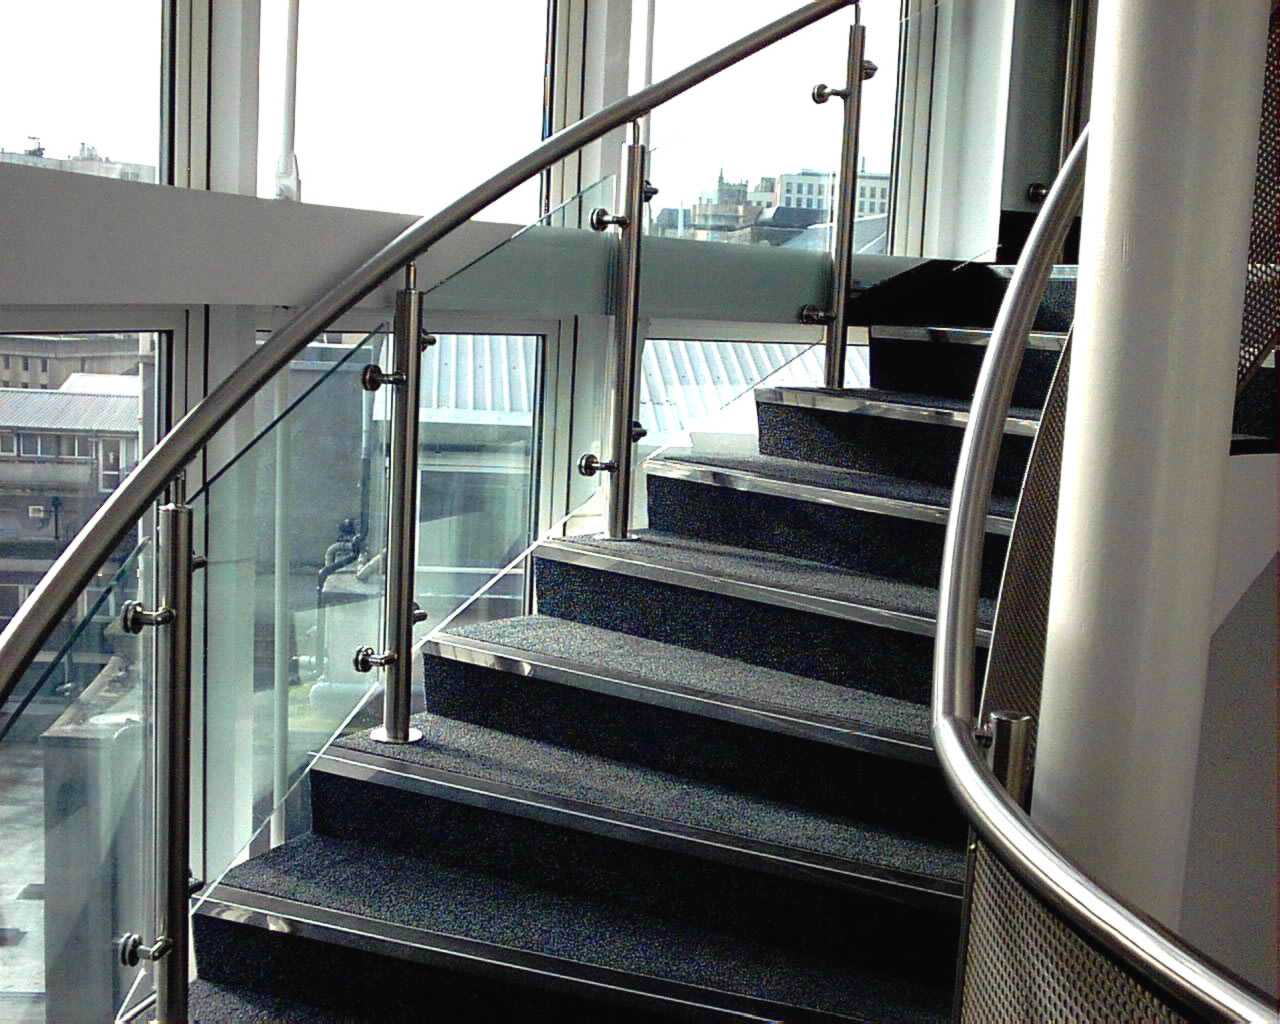 sweeping stainless steel handrail on staircase